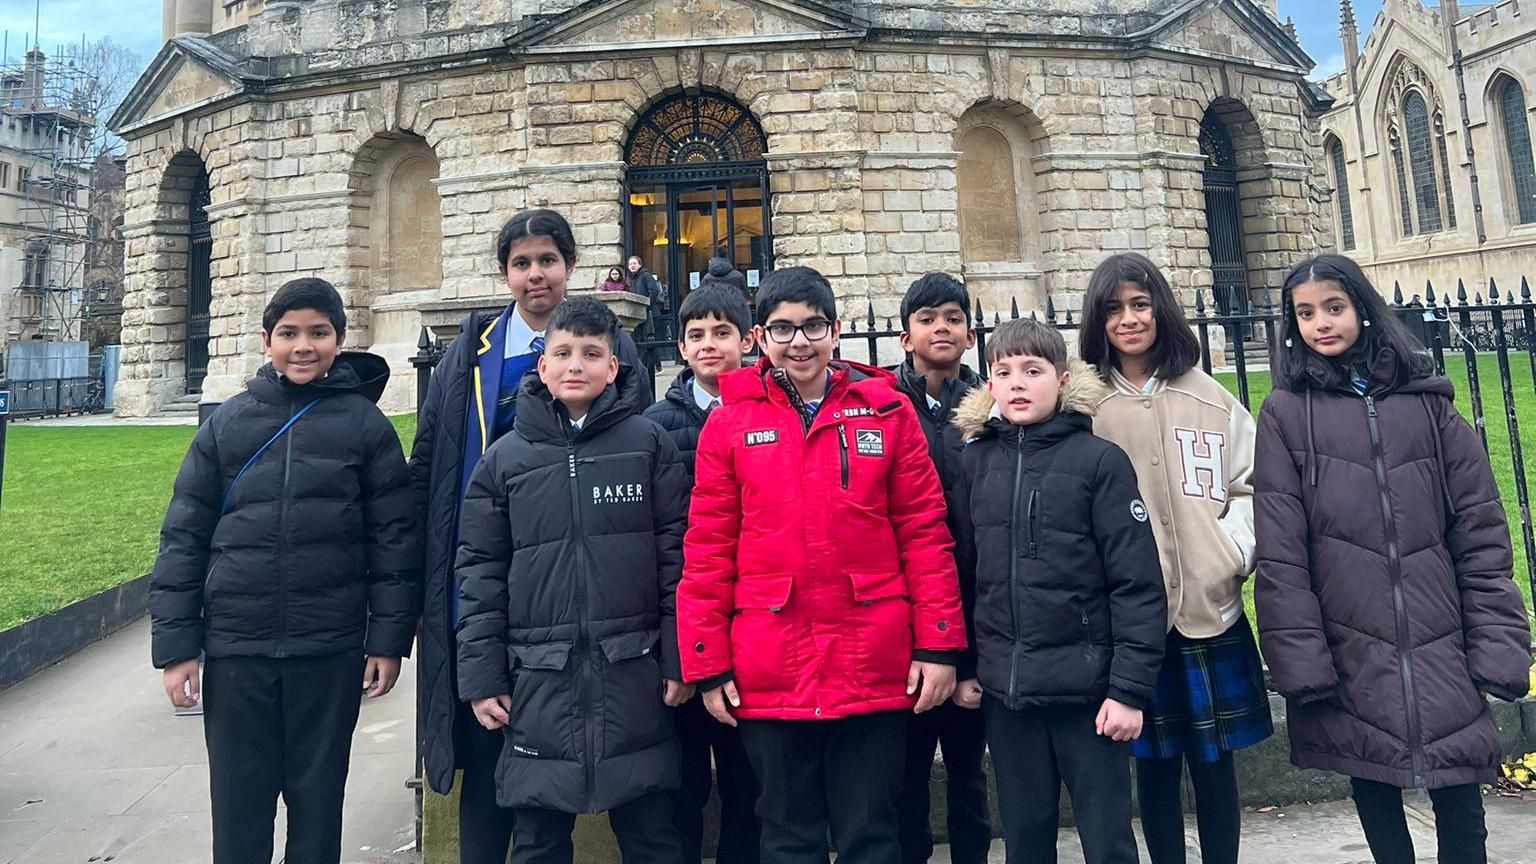 Pupils aged nine to 11 visited the University of Oxford this month